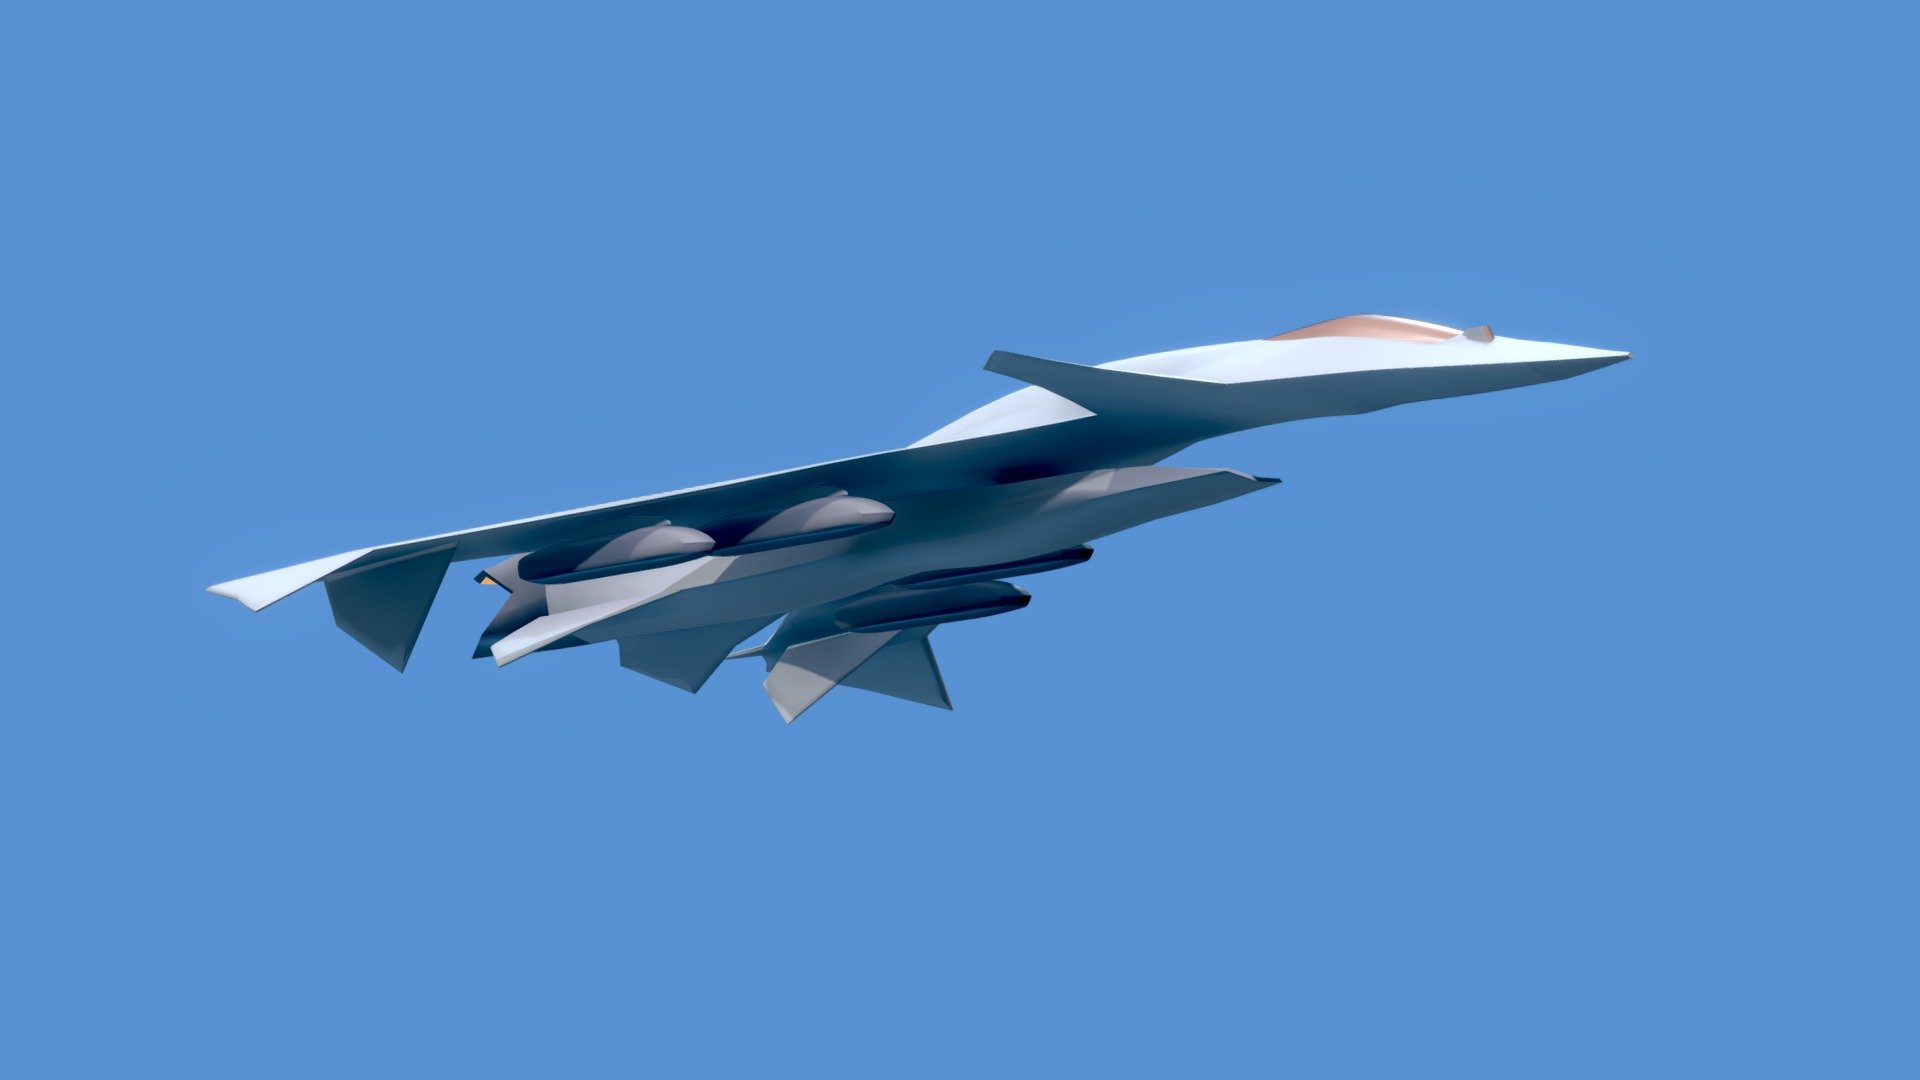 6th/7th Generation Fighter - 3D model by 2 3 1 2 2 5 (@231225) 3d model